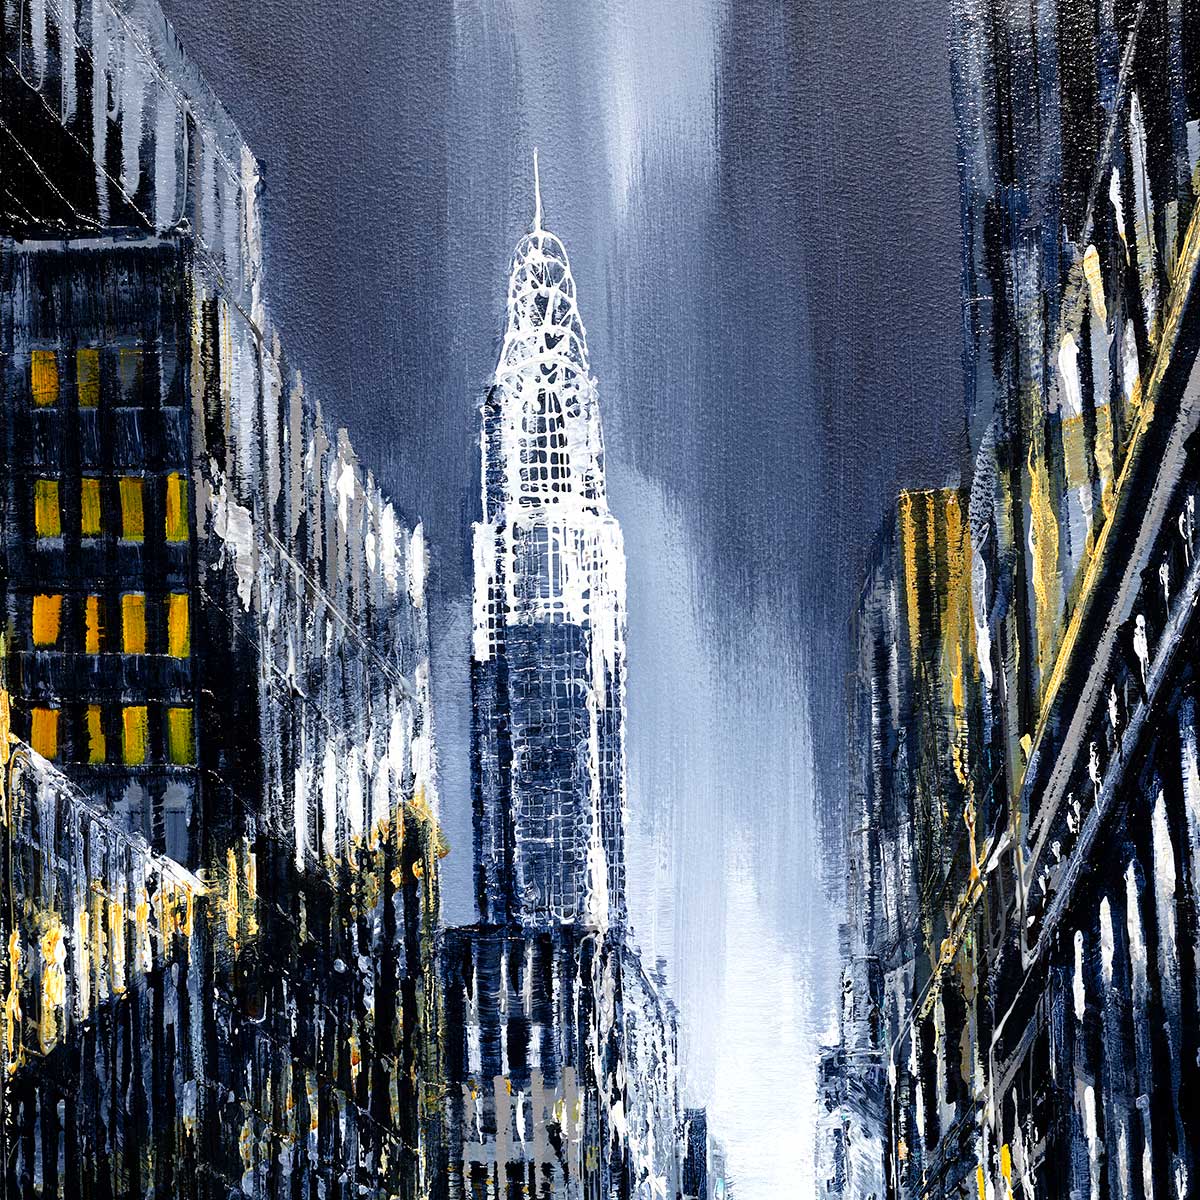 The City That Never Sleeps - SOLD